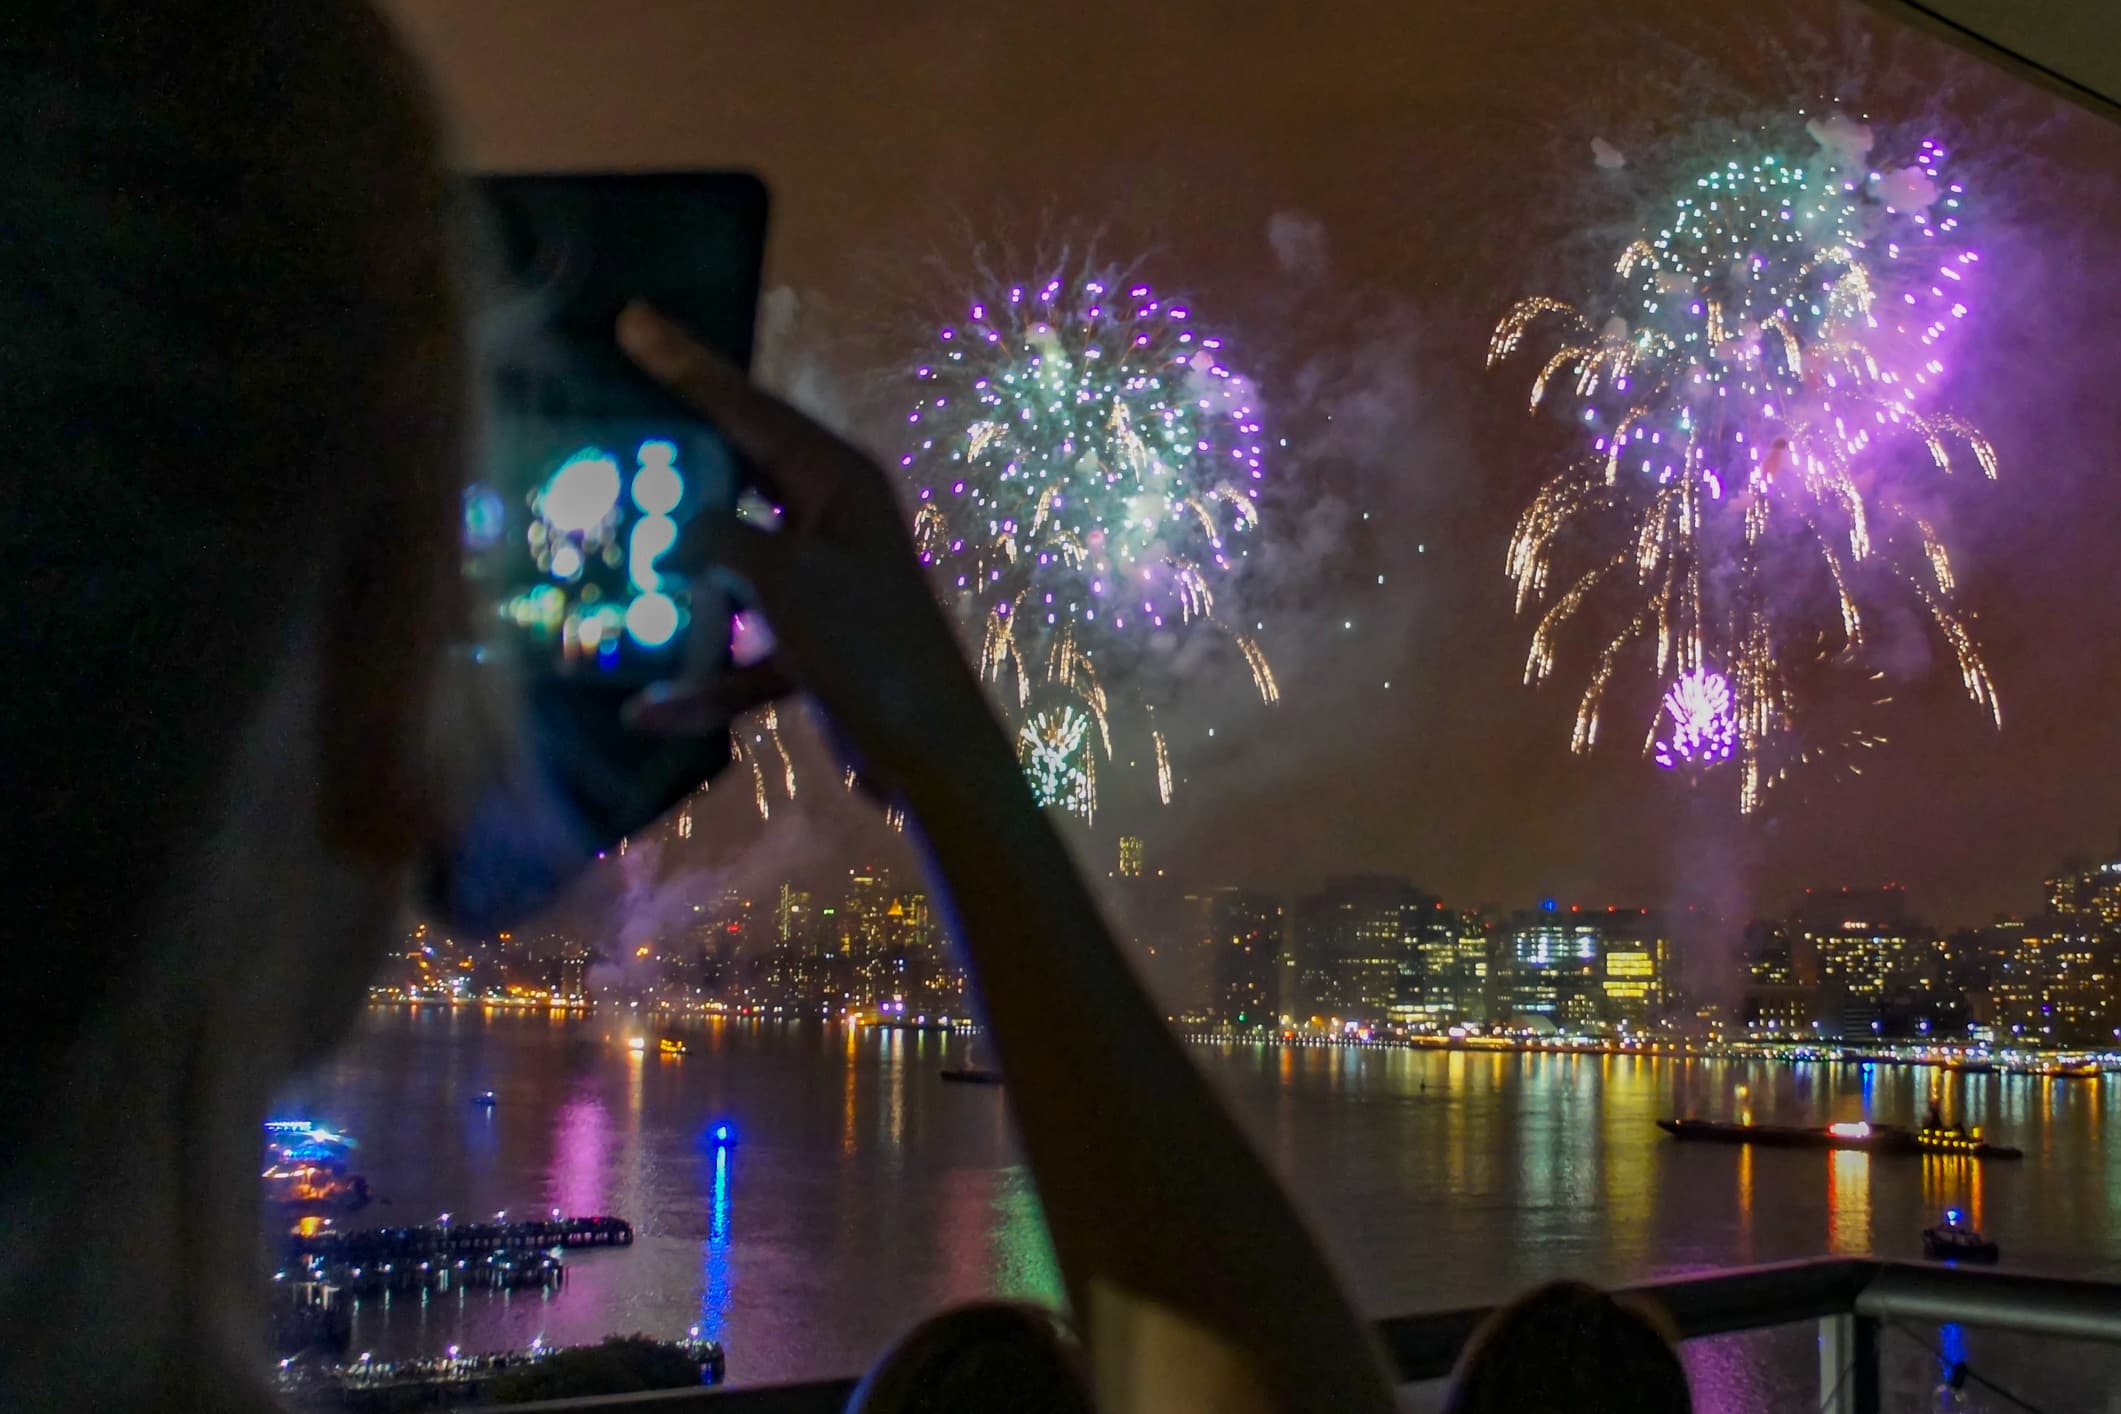 A view of New York City's 4th of July fireworks with a cellphone photographer in the foreground.